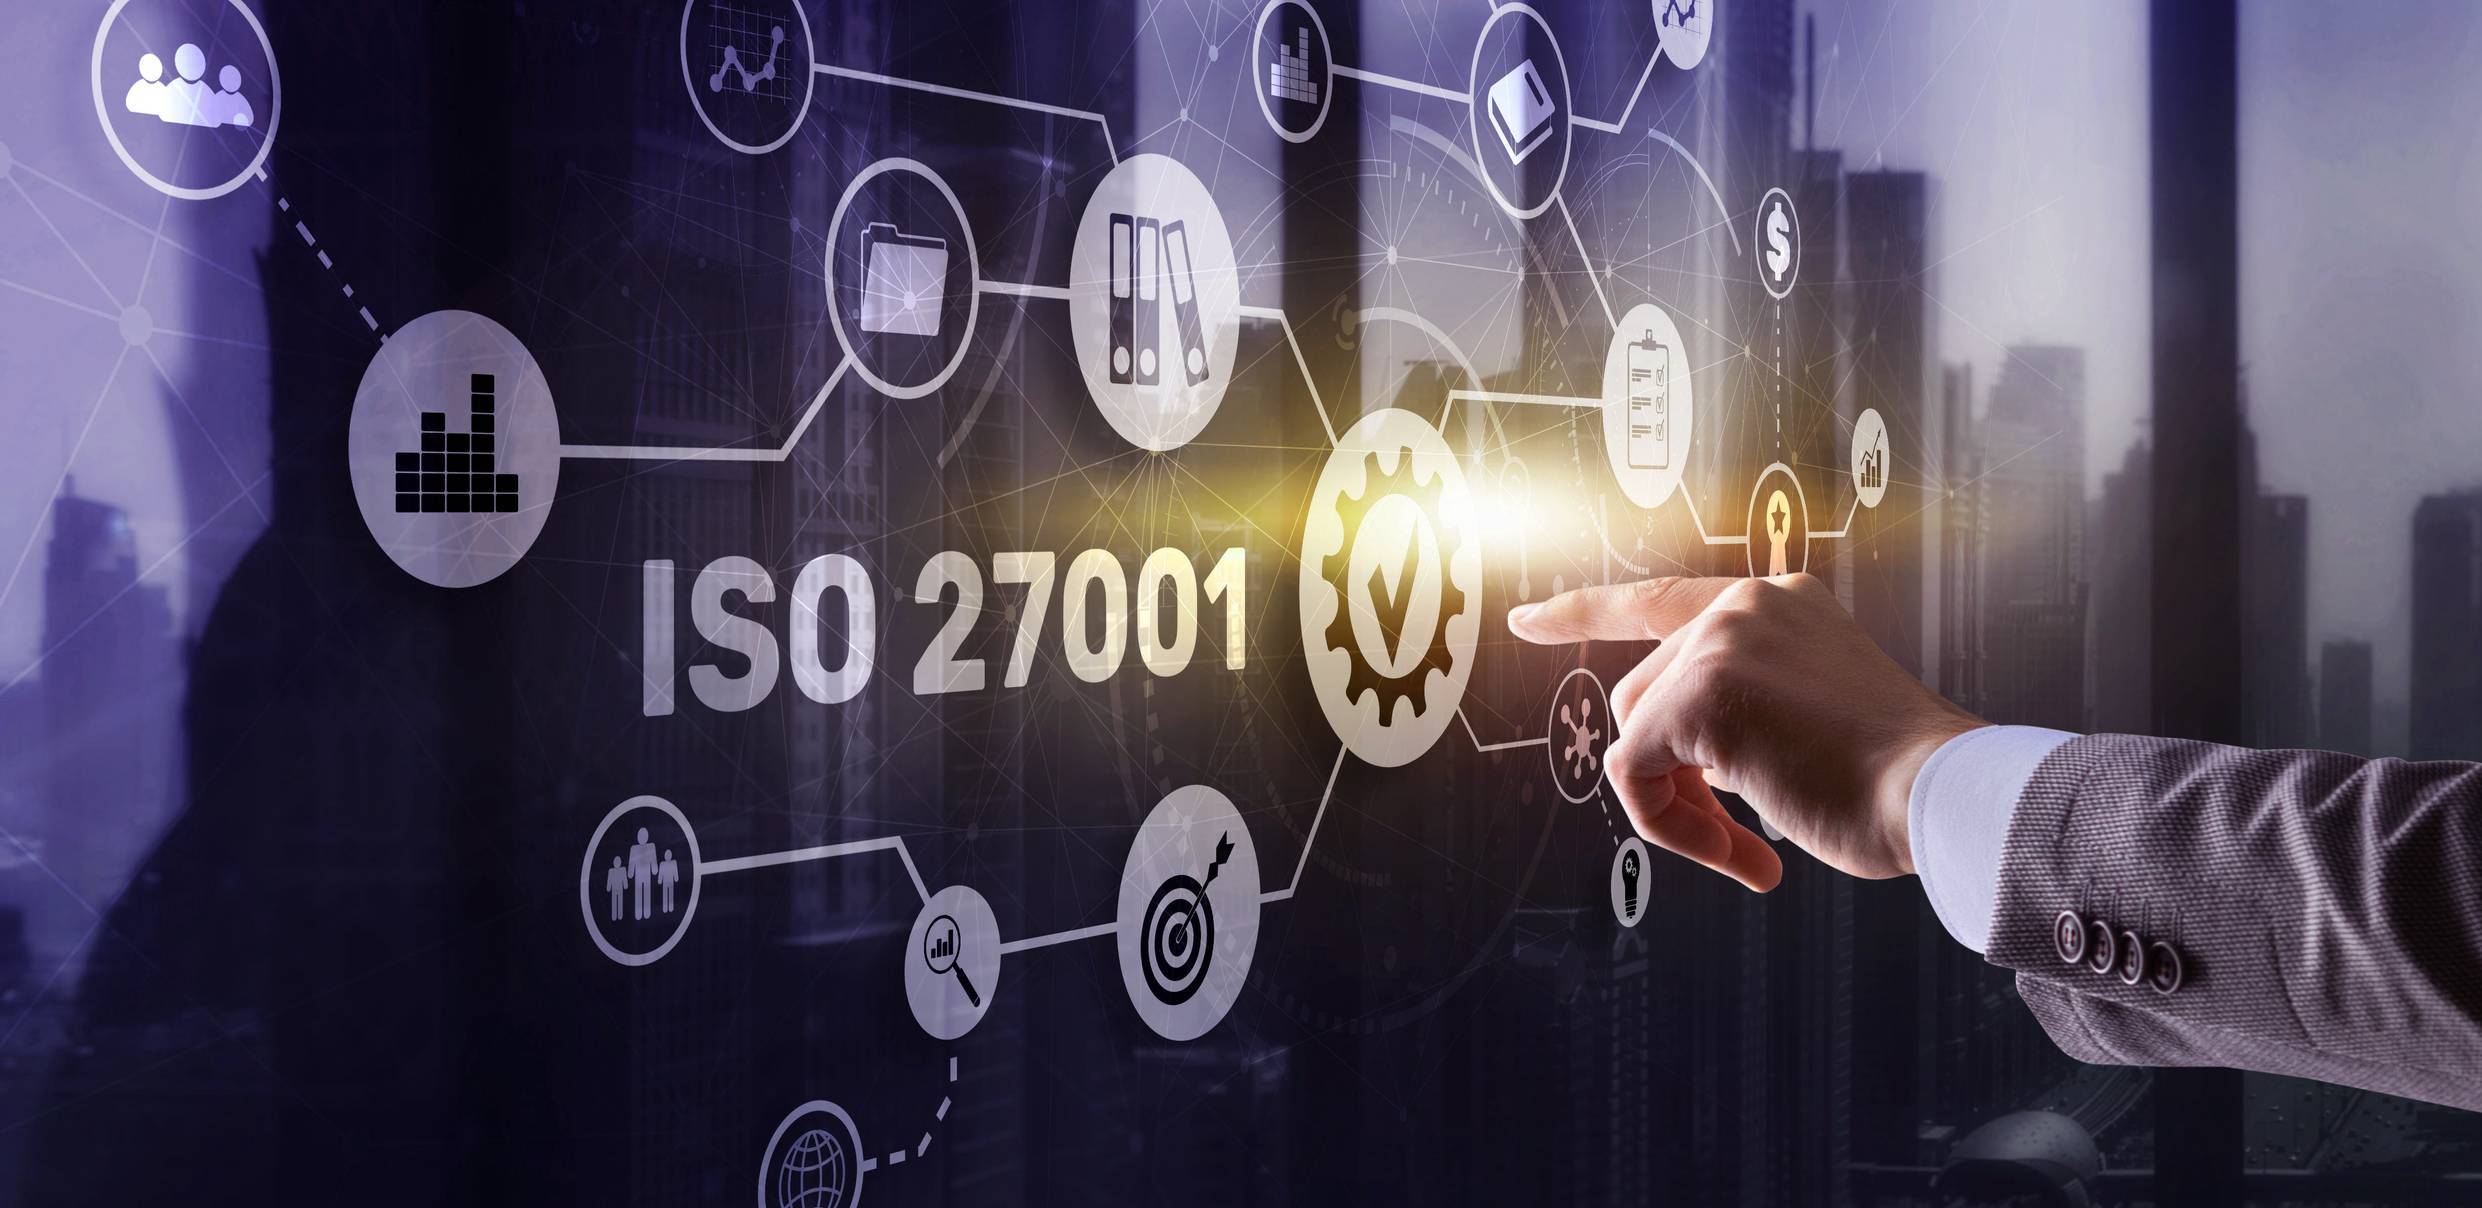 certification ISO 27001